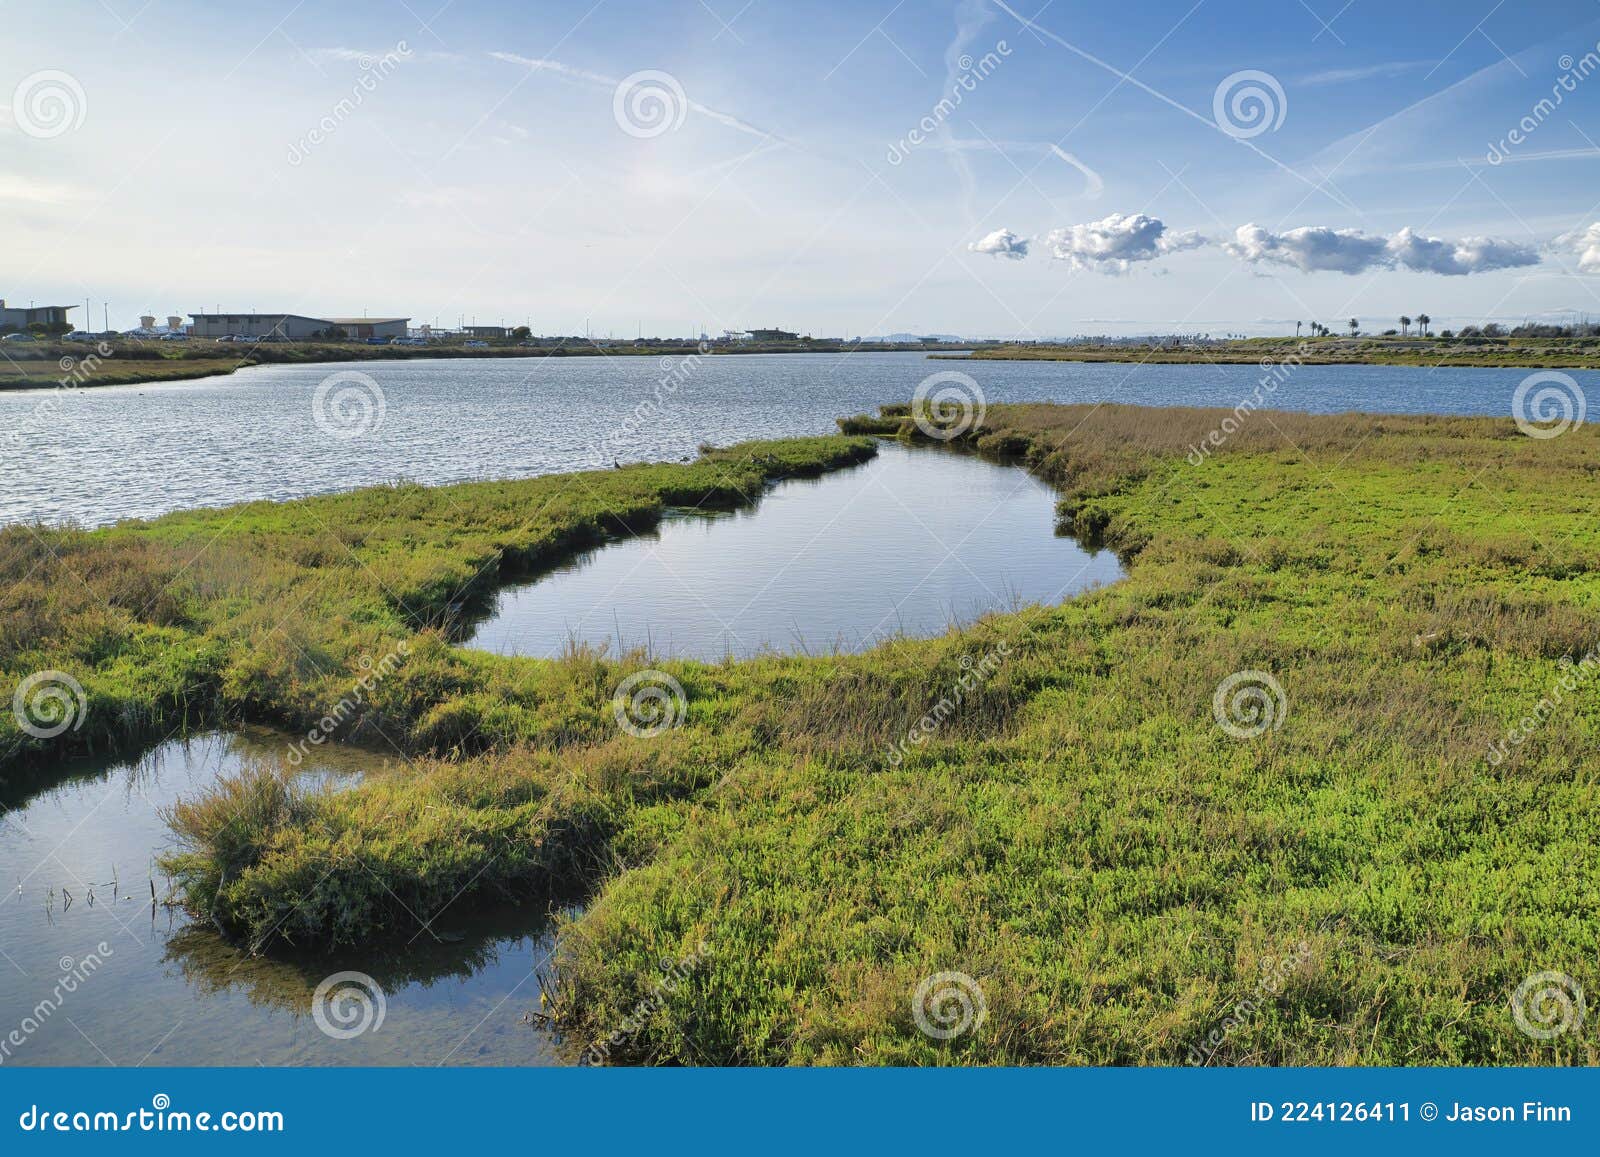 panoramic view of bolsa chica ecological reserve in huntington beach california